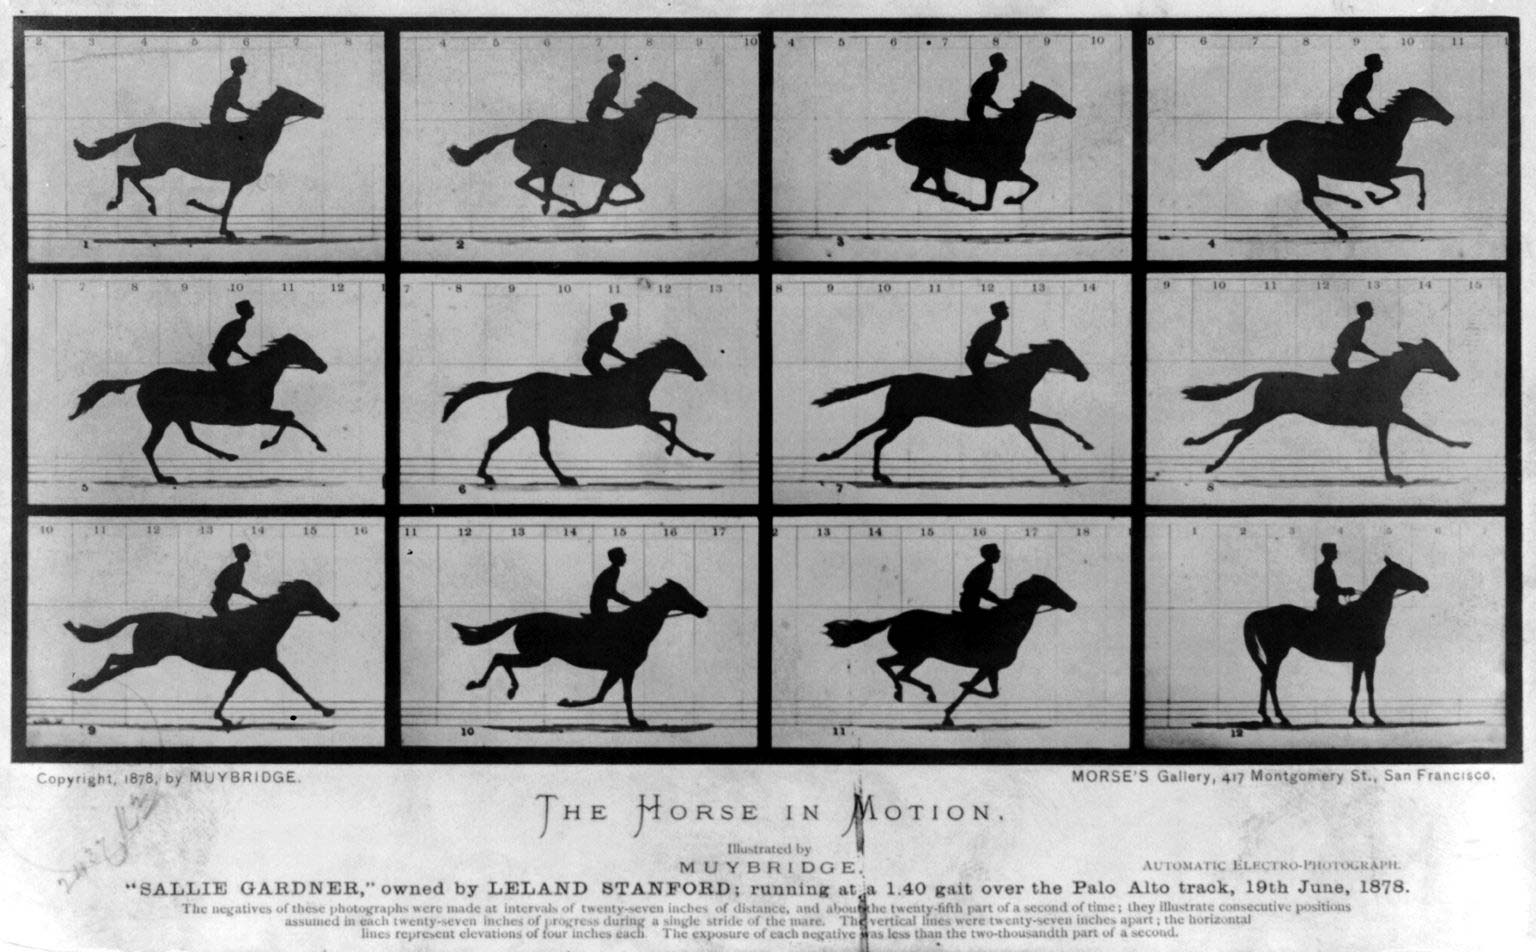 The_Horse_in_Motion by Eadward Muybridge as an example of what is timelapse.